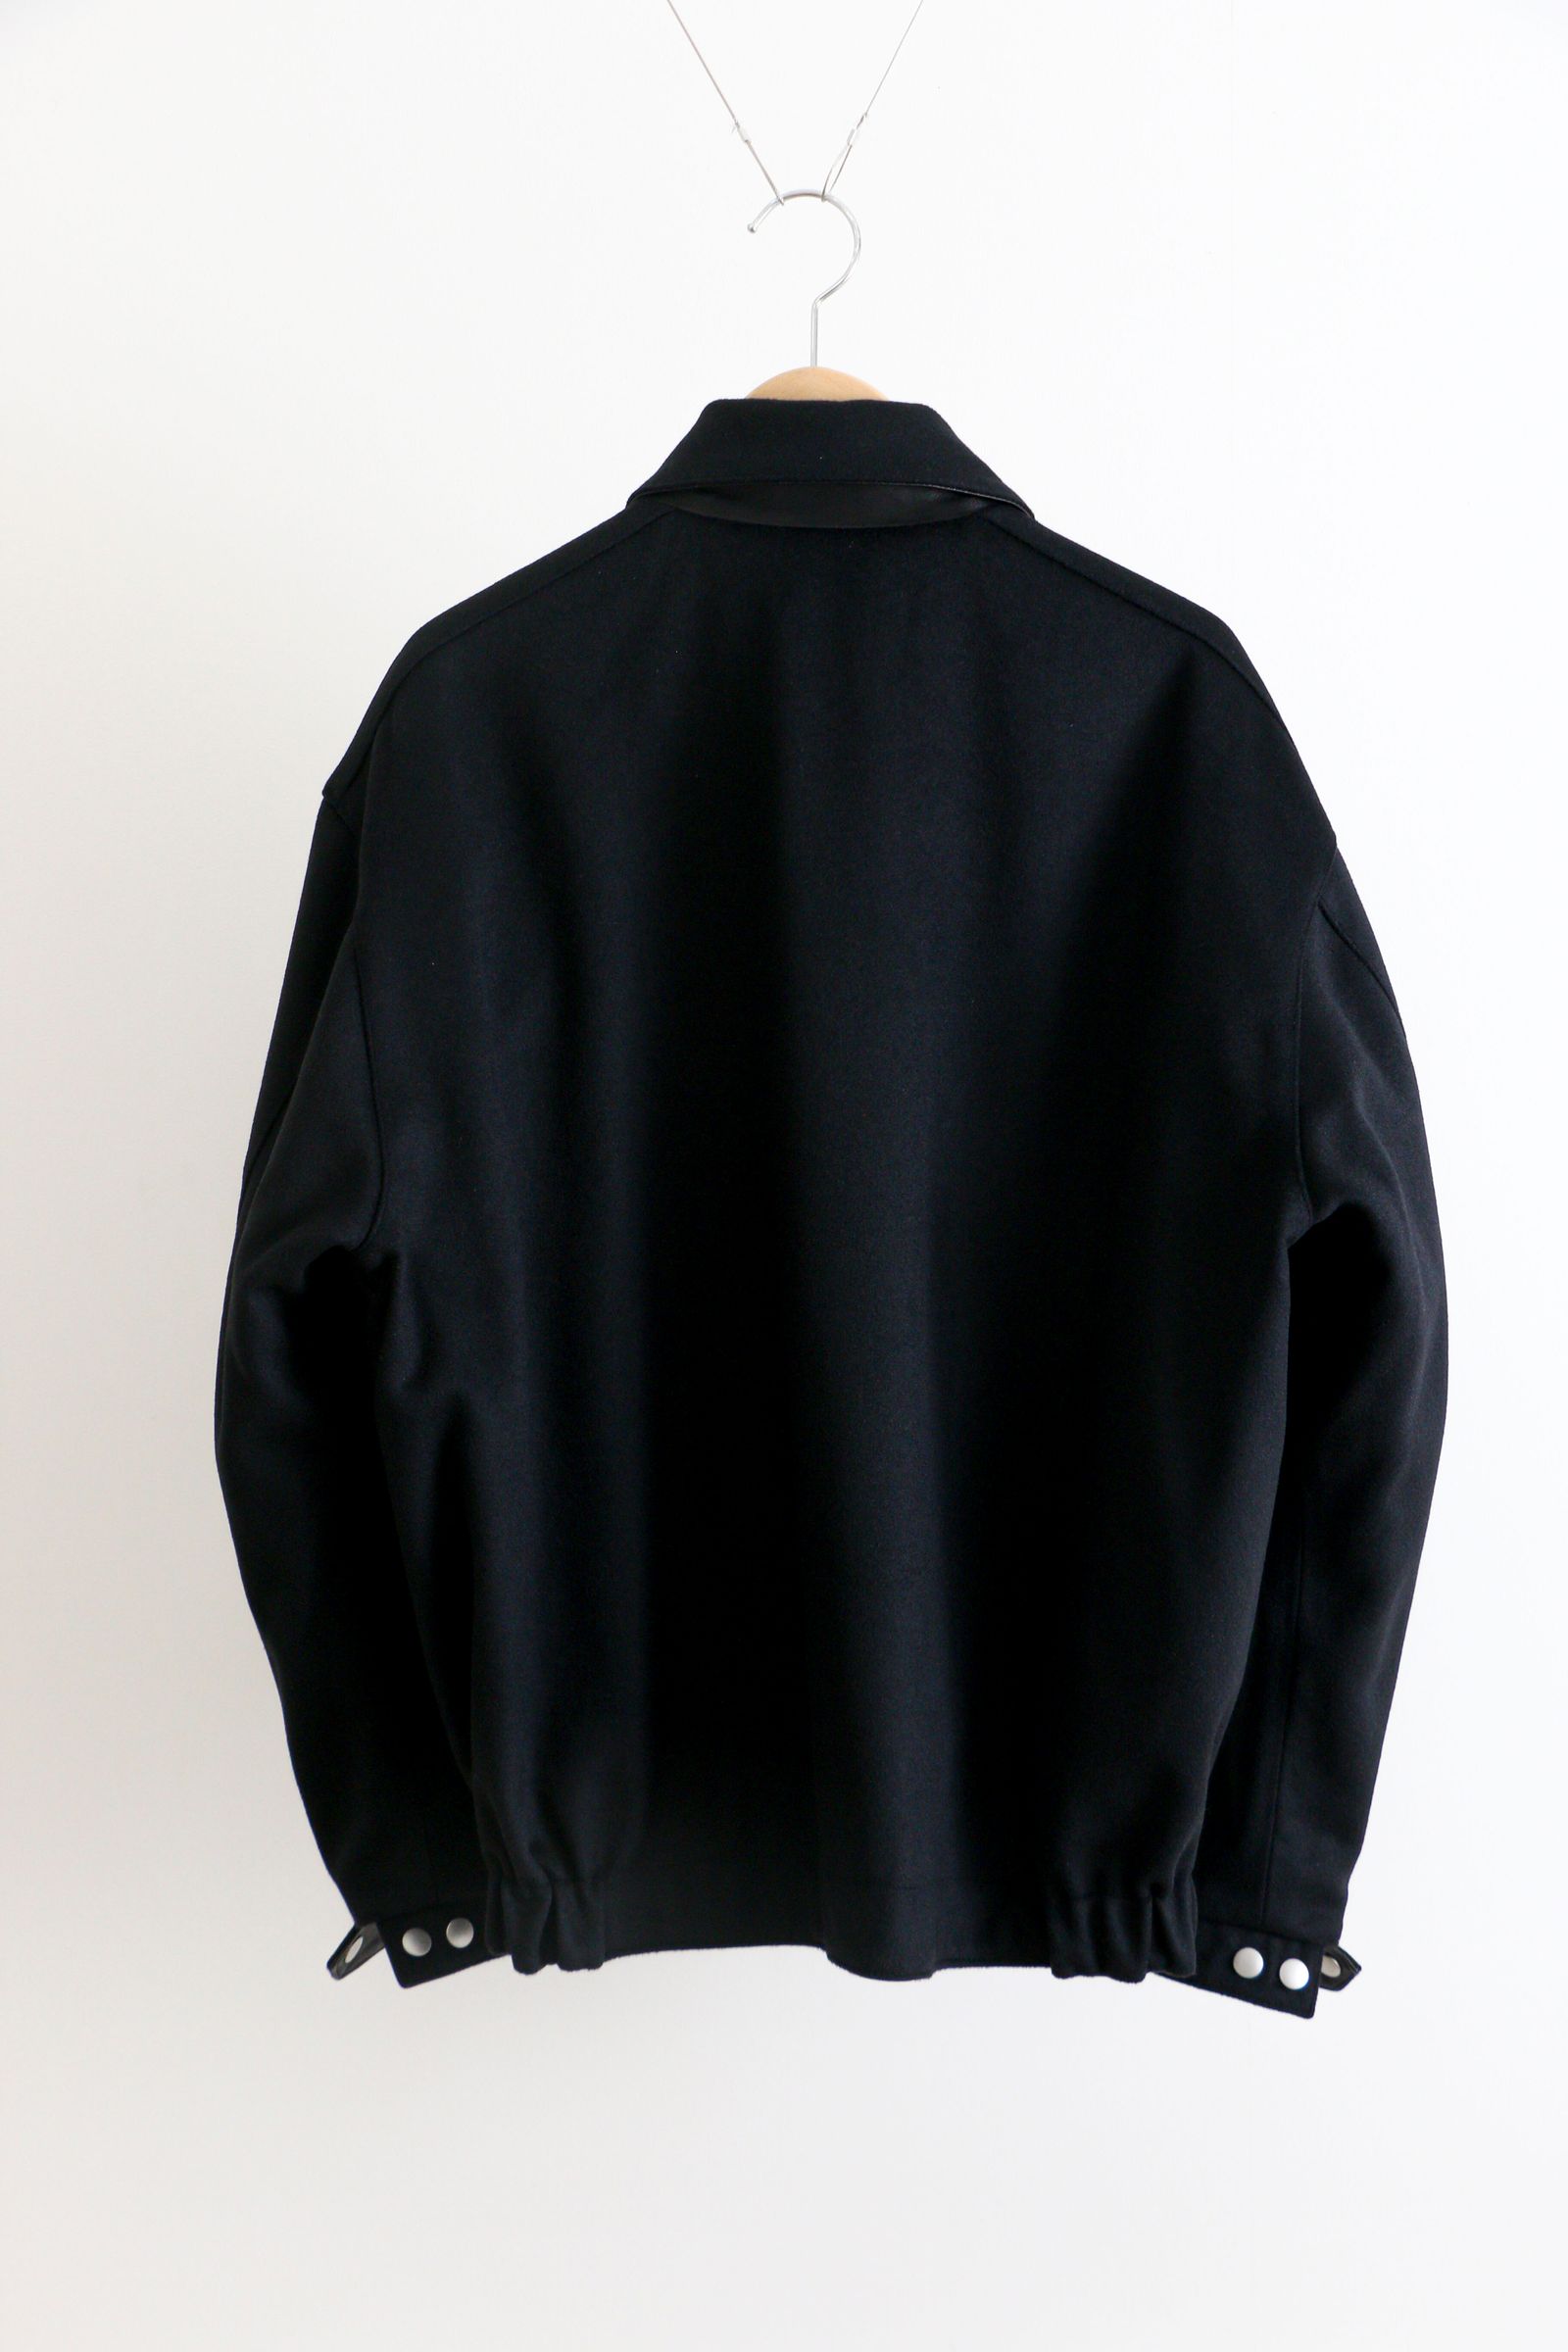 SEVEN BY SEVEN - REVERSIBLE LEATHER BLOUSON BLACK - Sheep leather